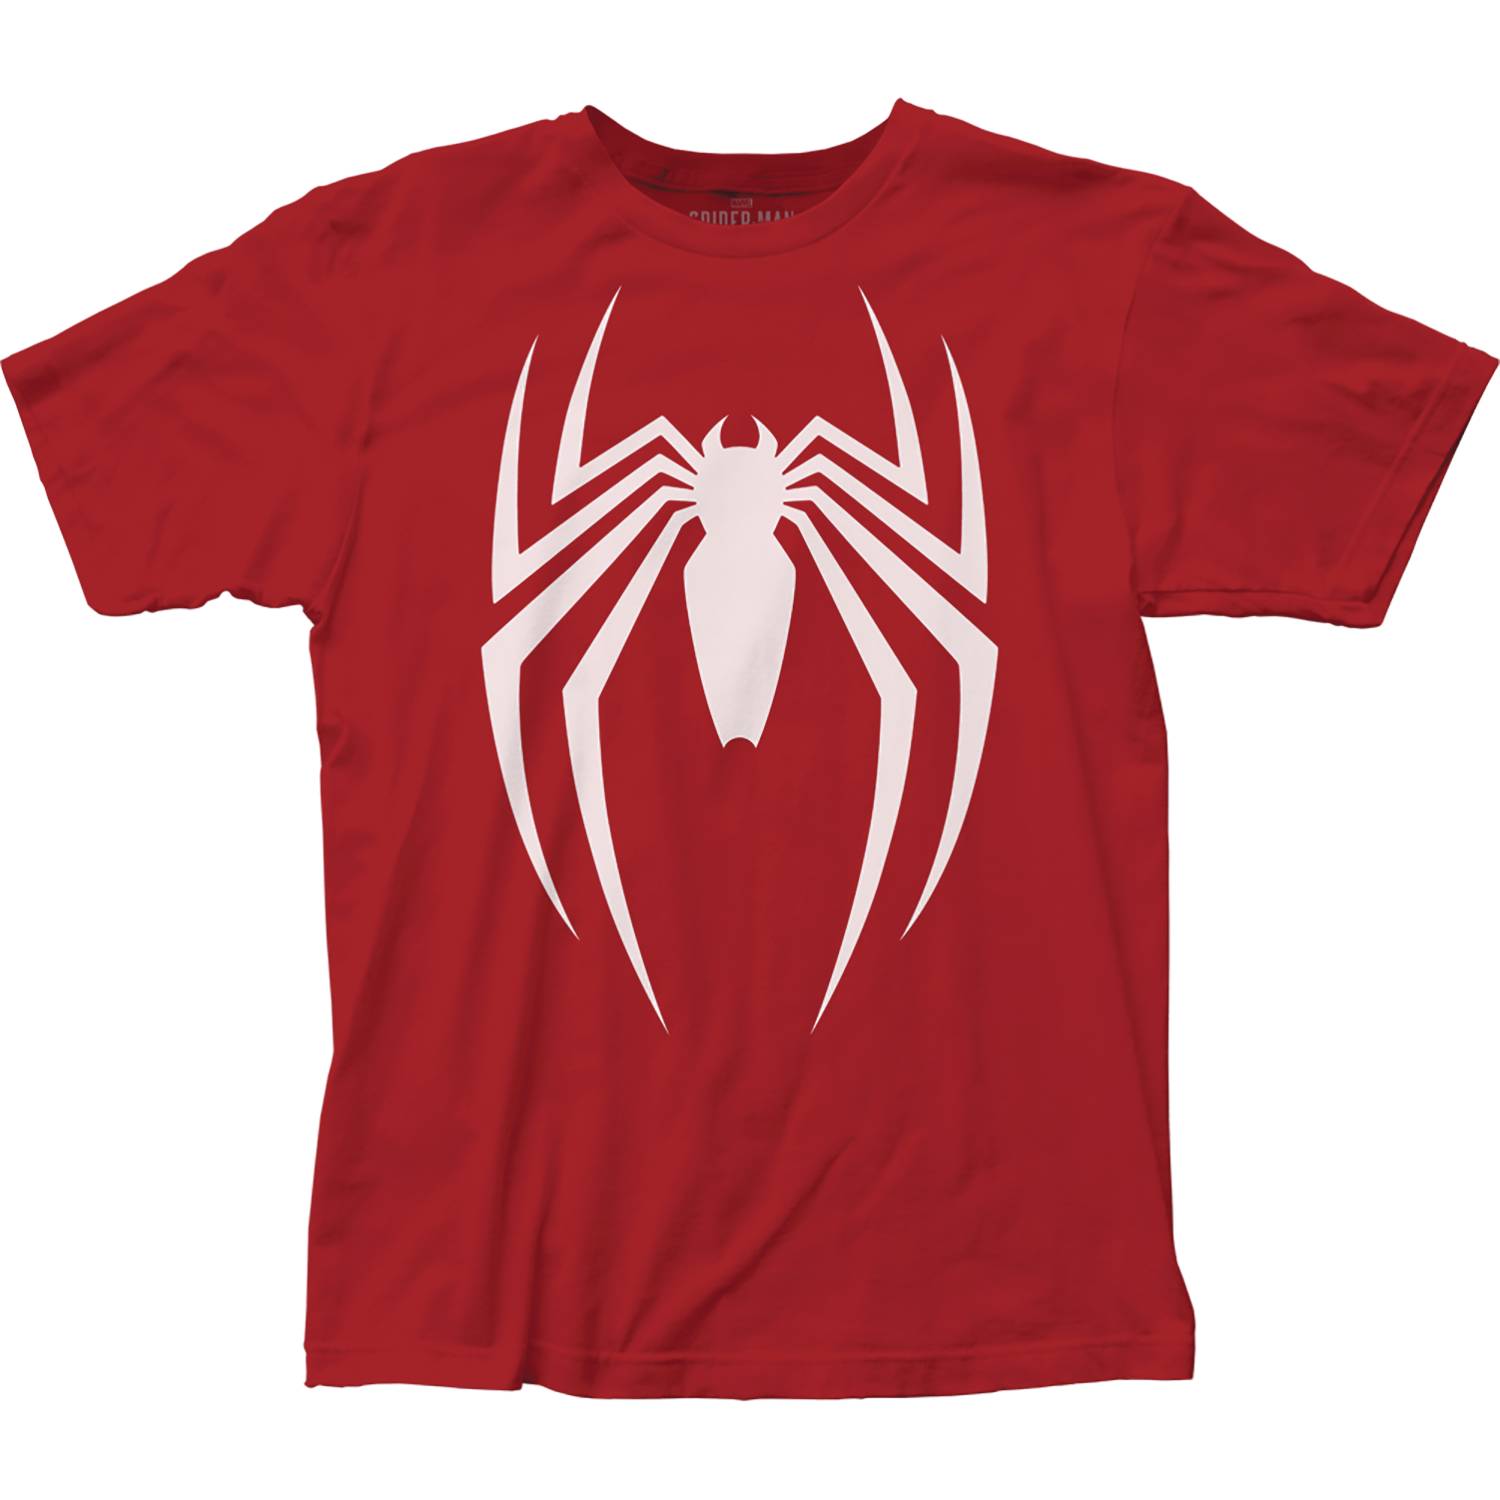 Spider-Man Video Game Logo T-Shirt Small